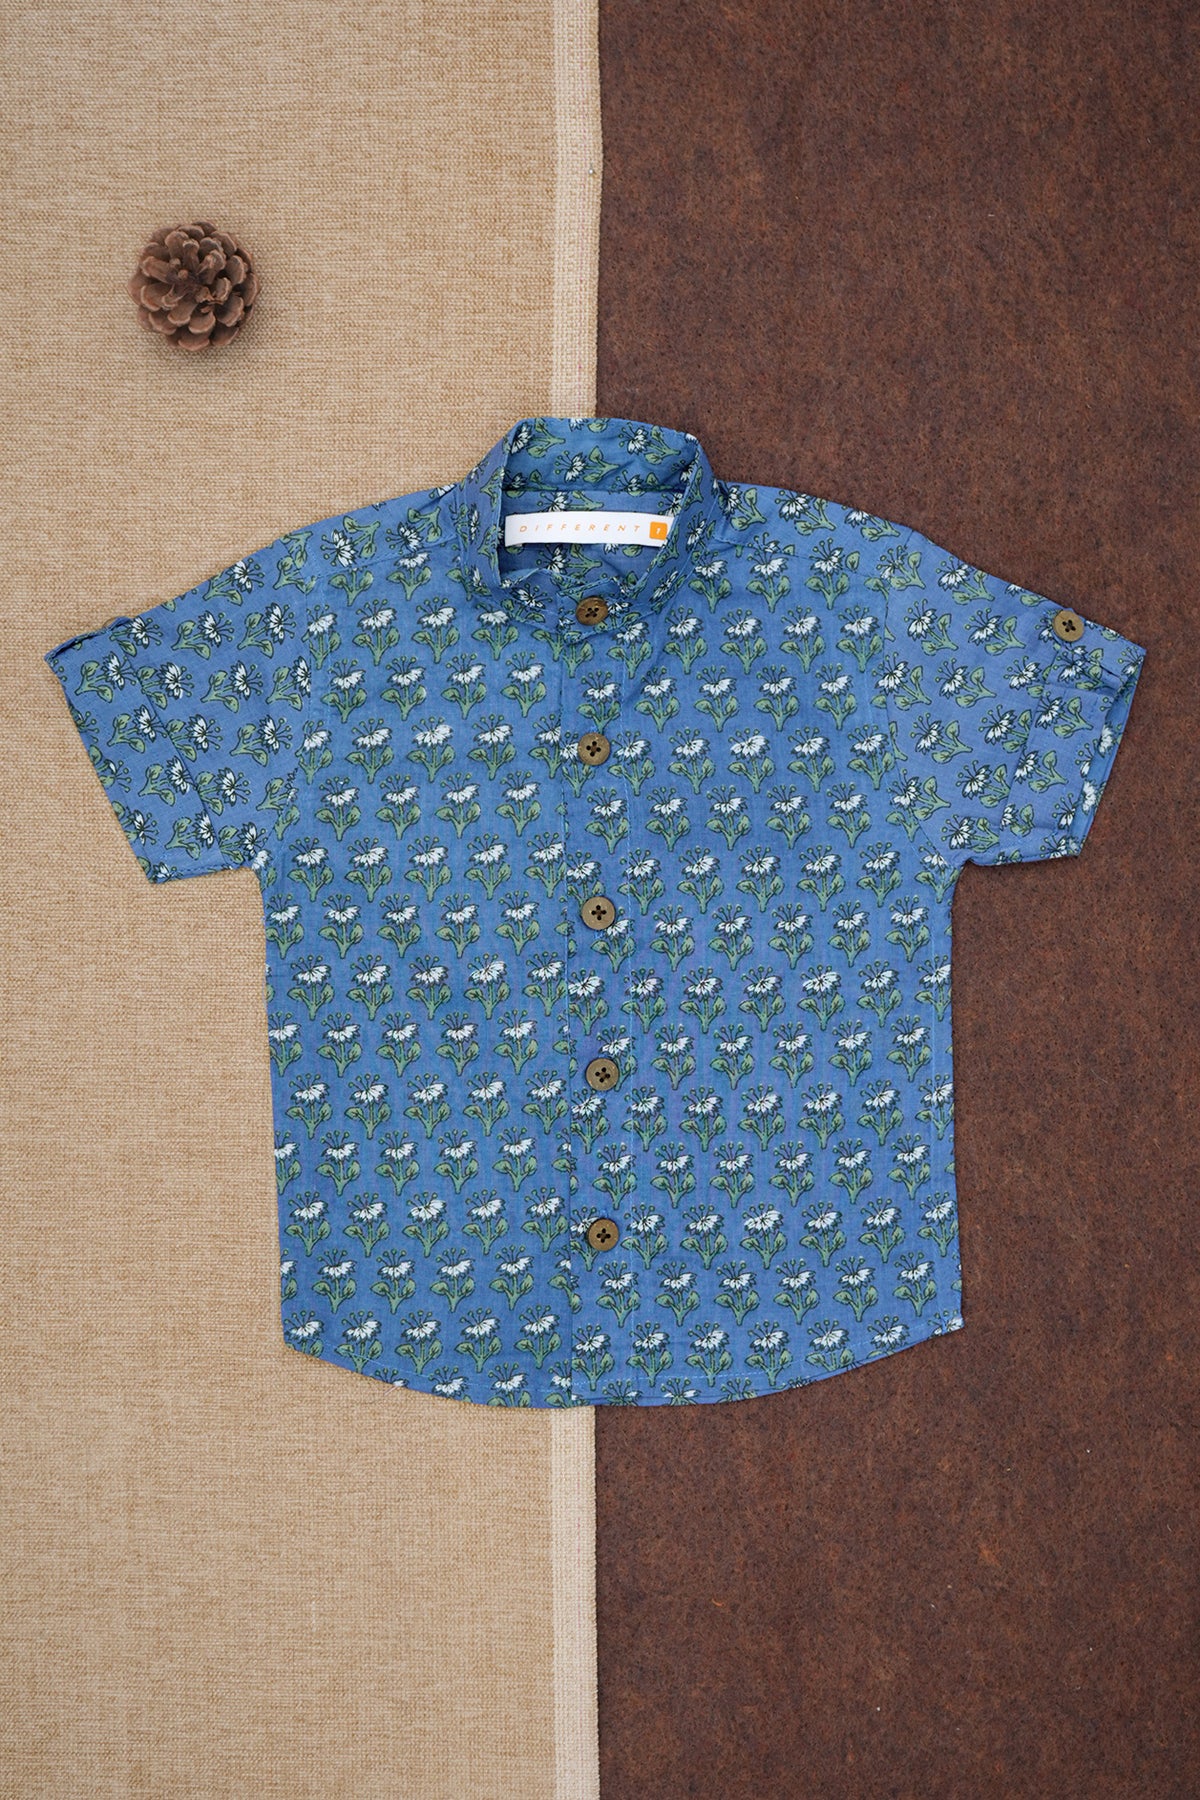 Chinese Collar With Floral Printed Blue Cotton Shirt